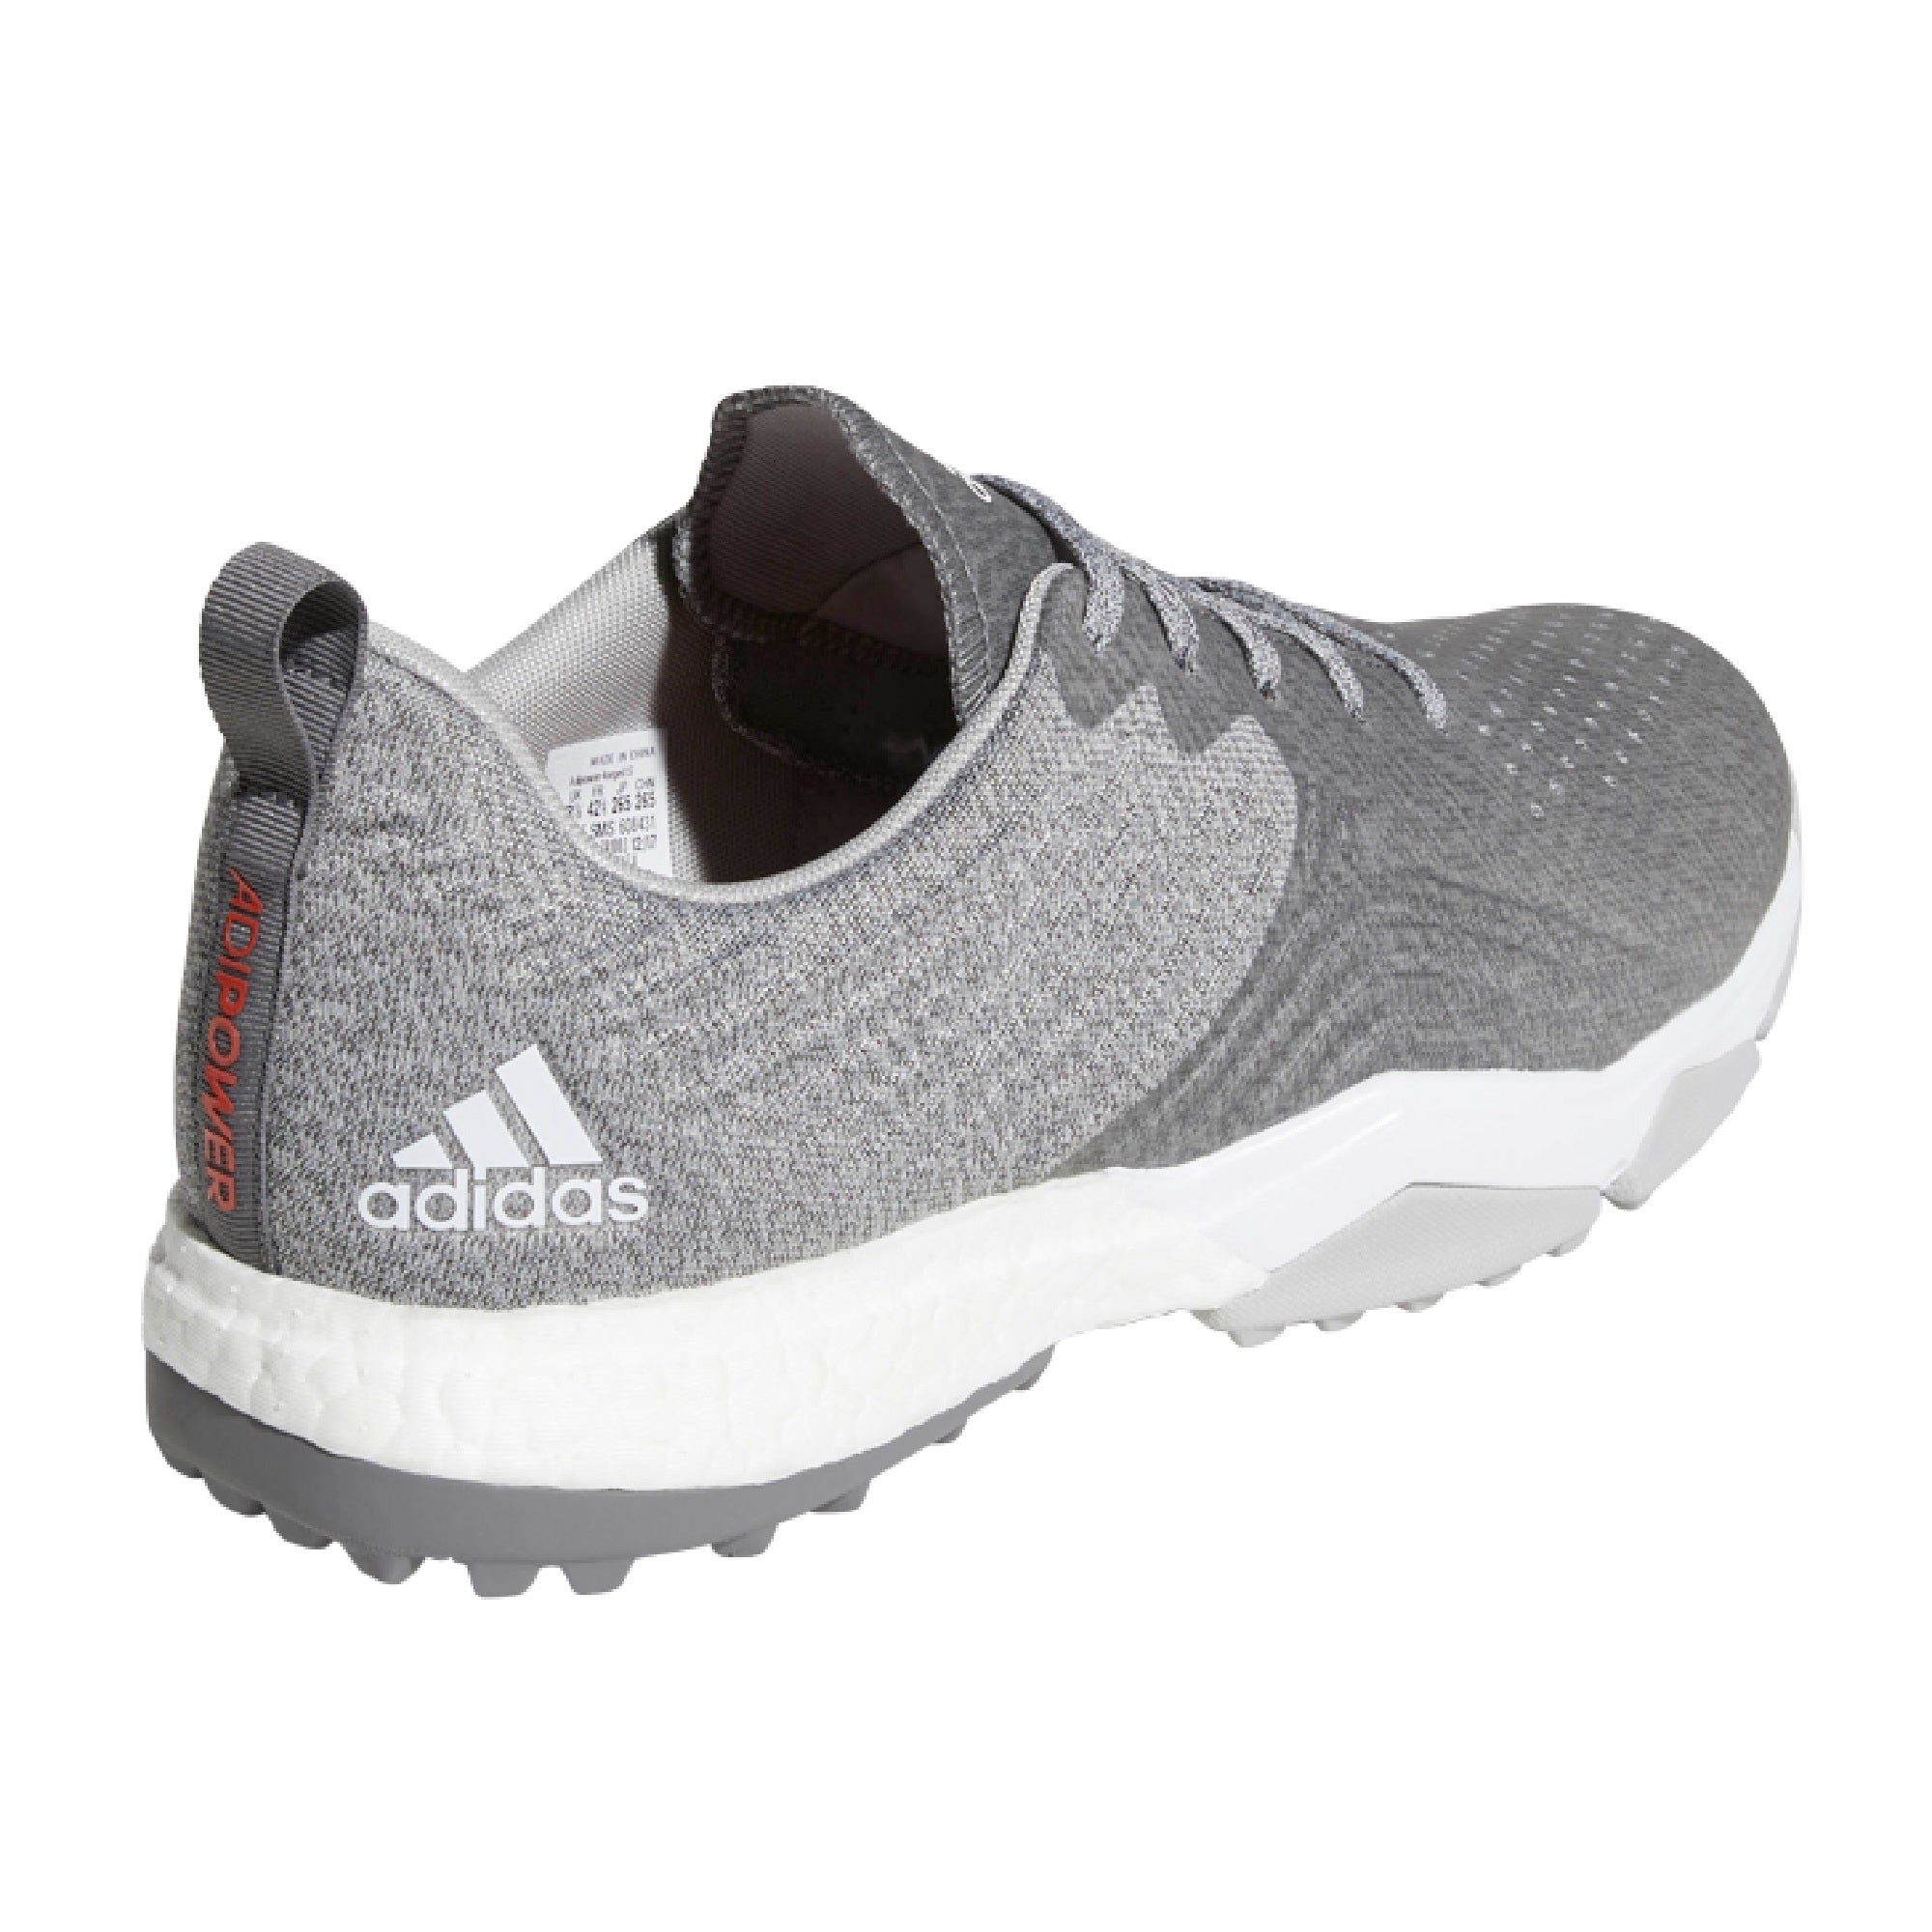 adidas 4orged golf shoes